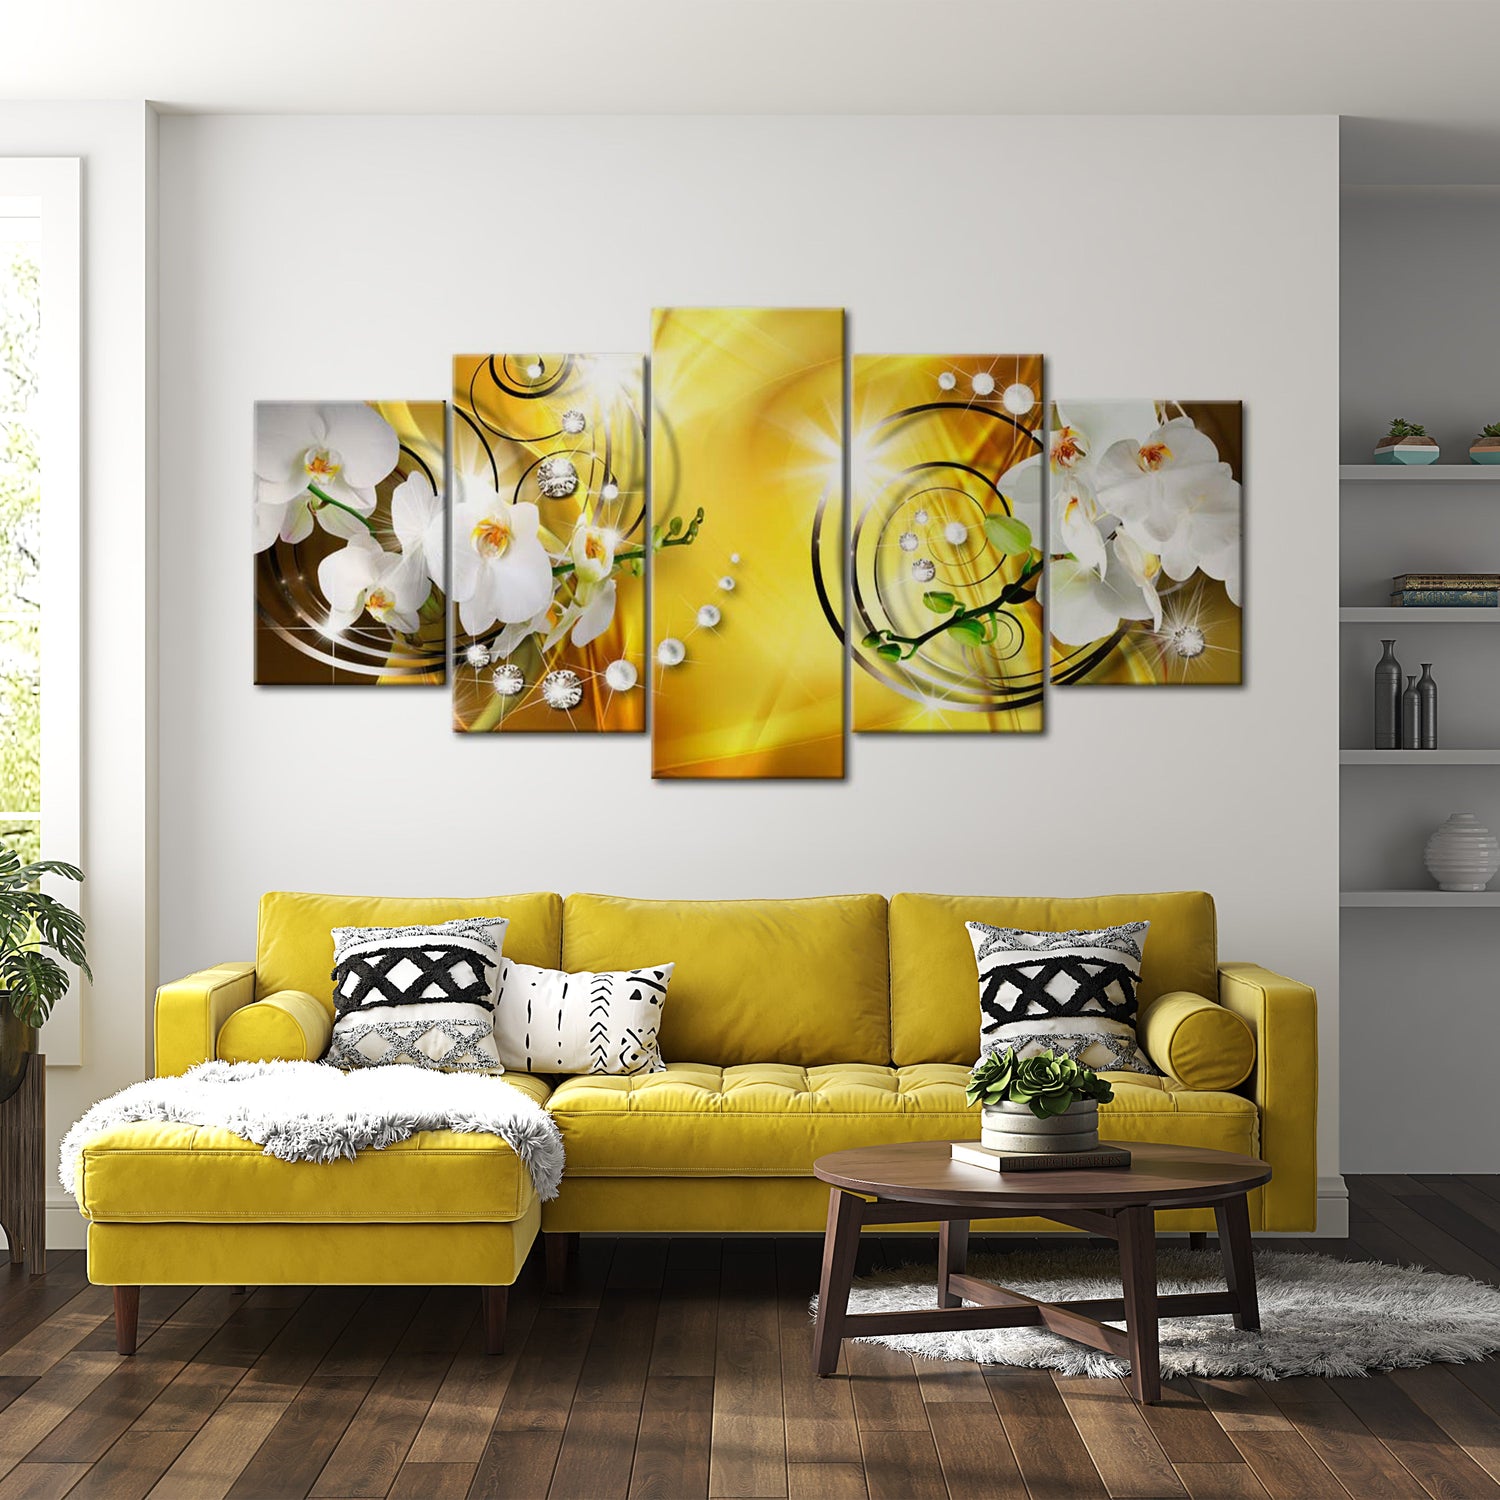 Glamour Canvas Wall Art - Yellow Admiration - 5 Pieces